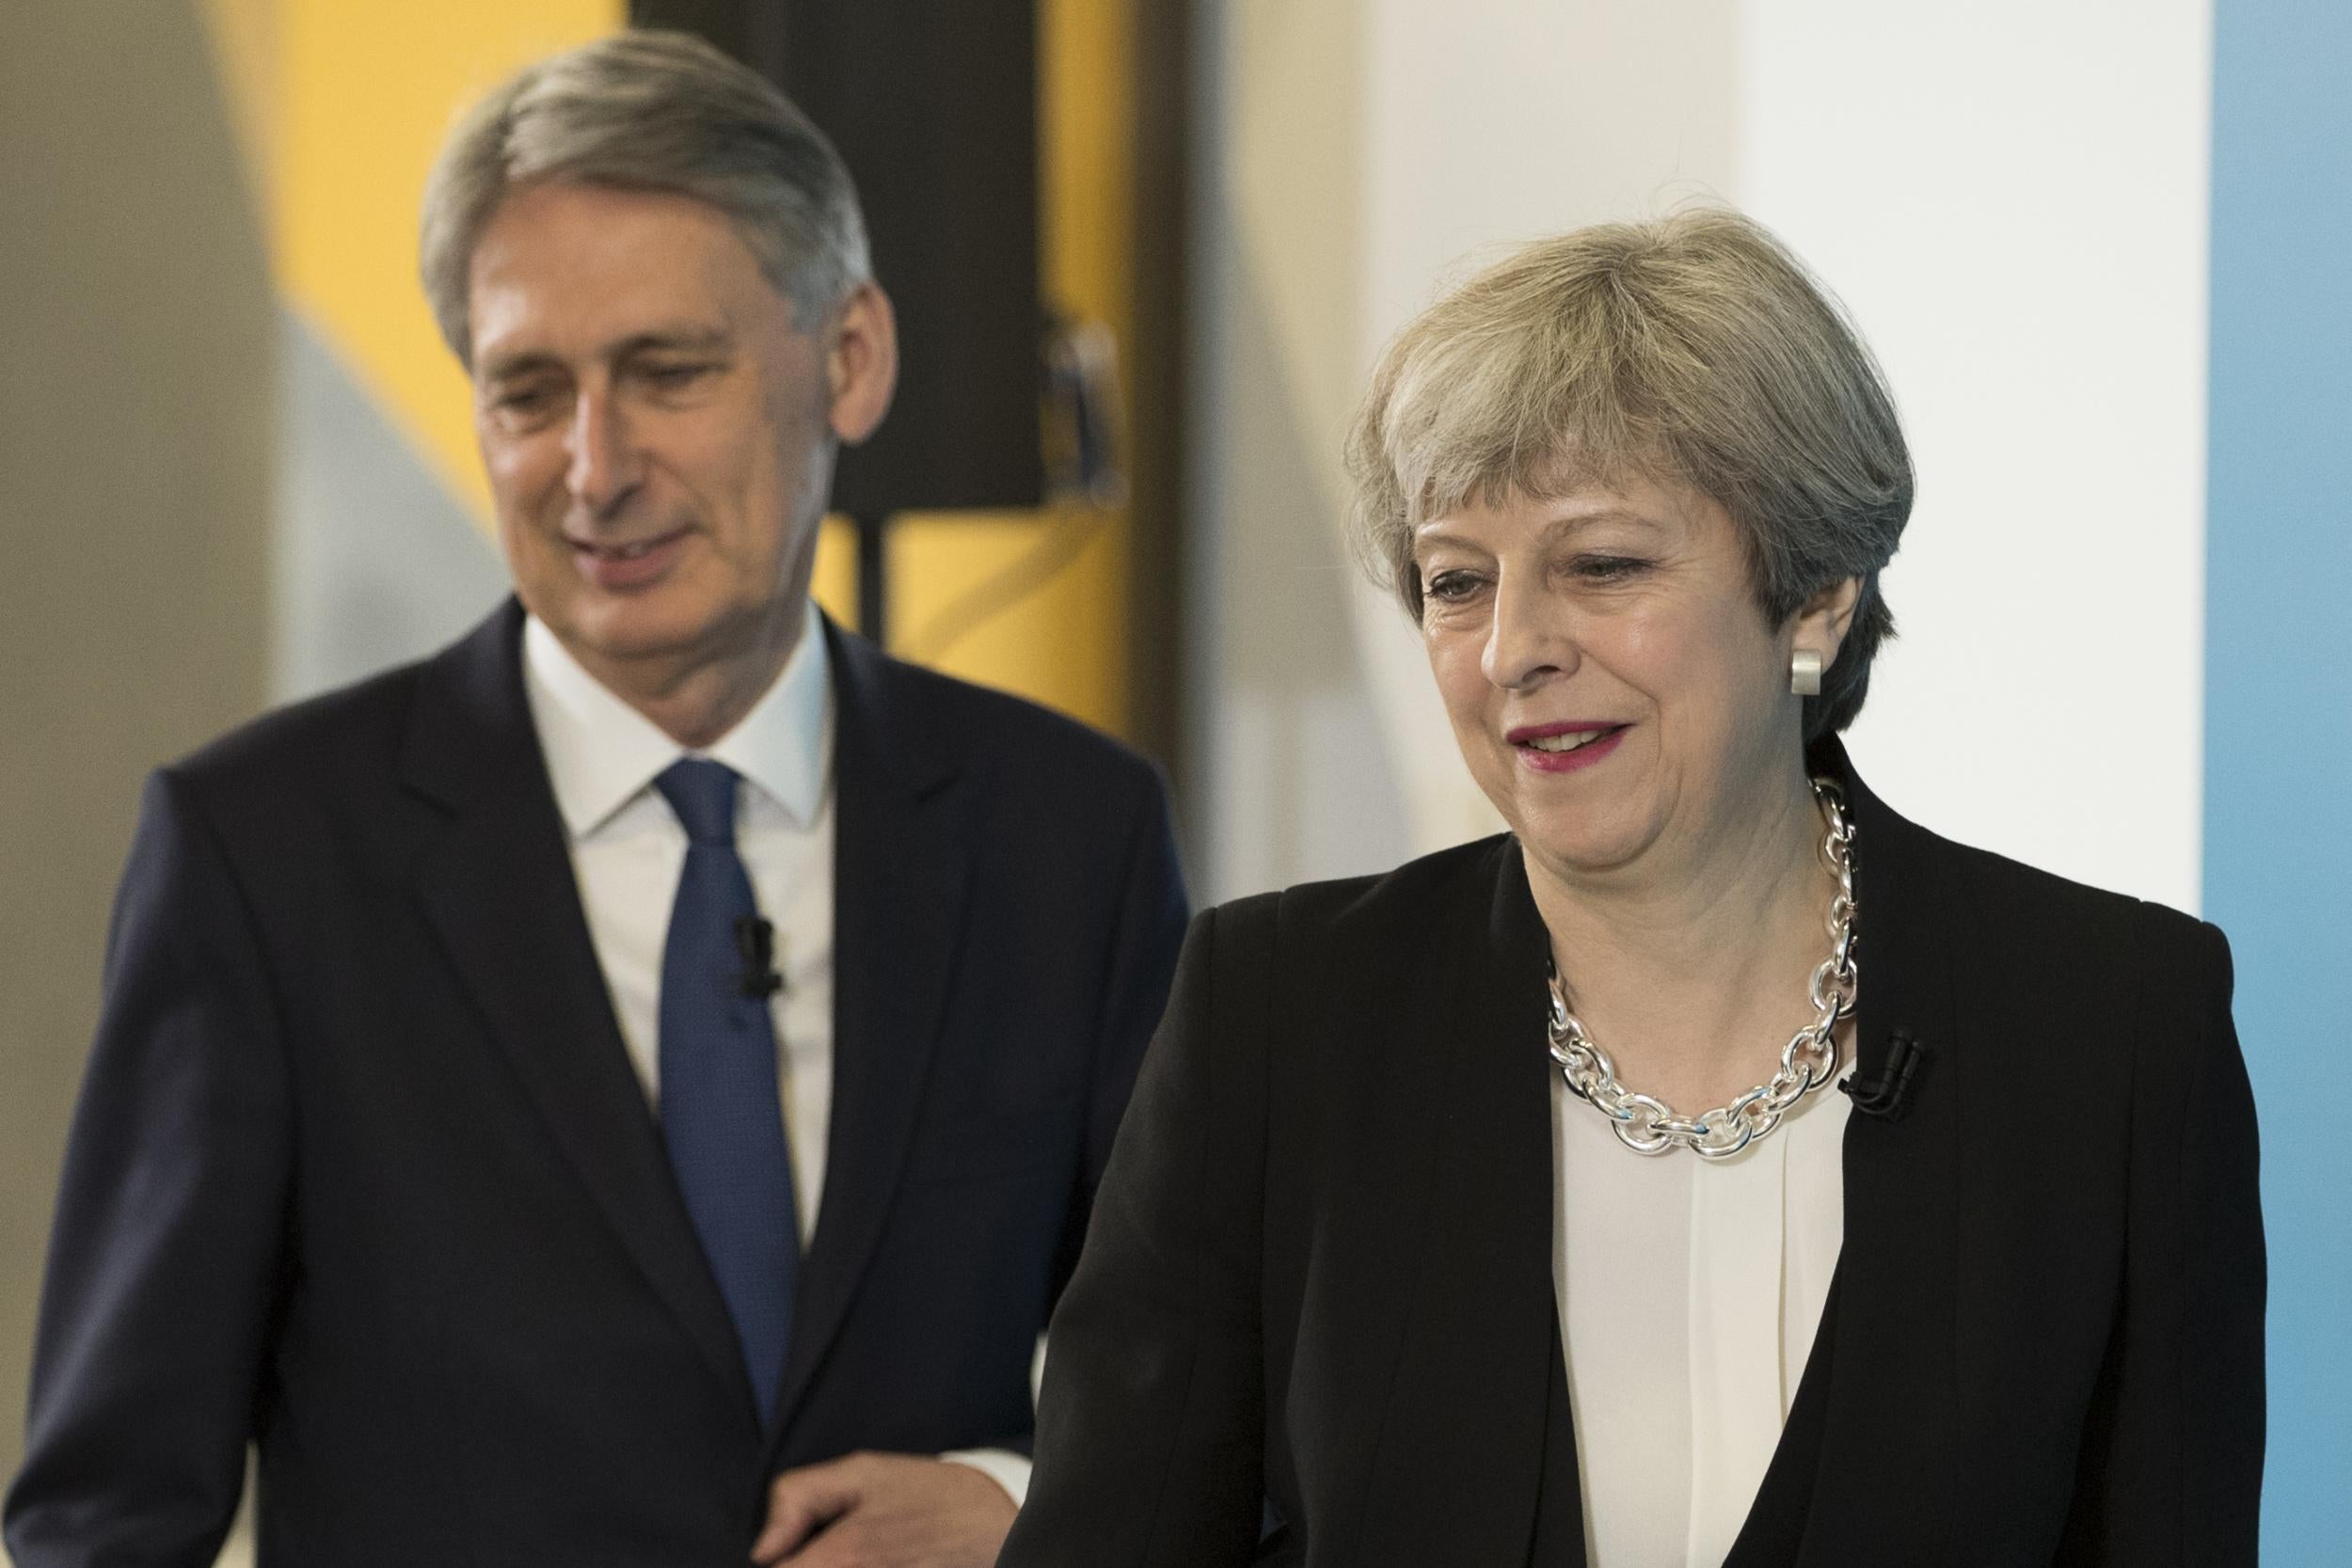 Chancellor Philip Hammond with PM Theresa May